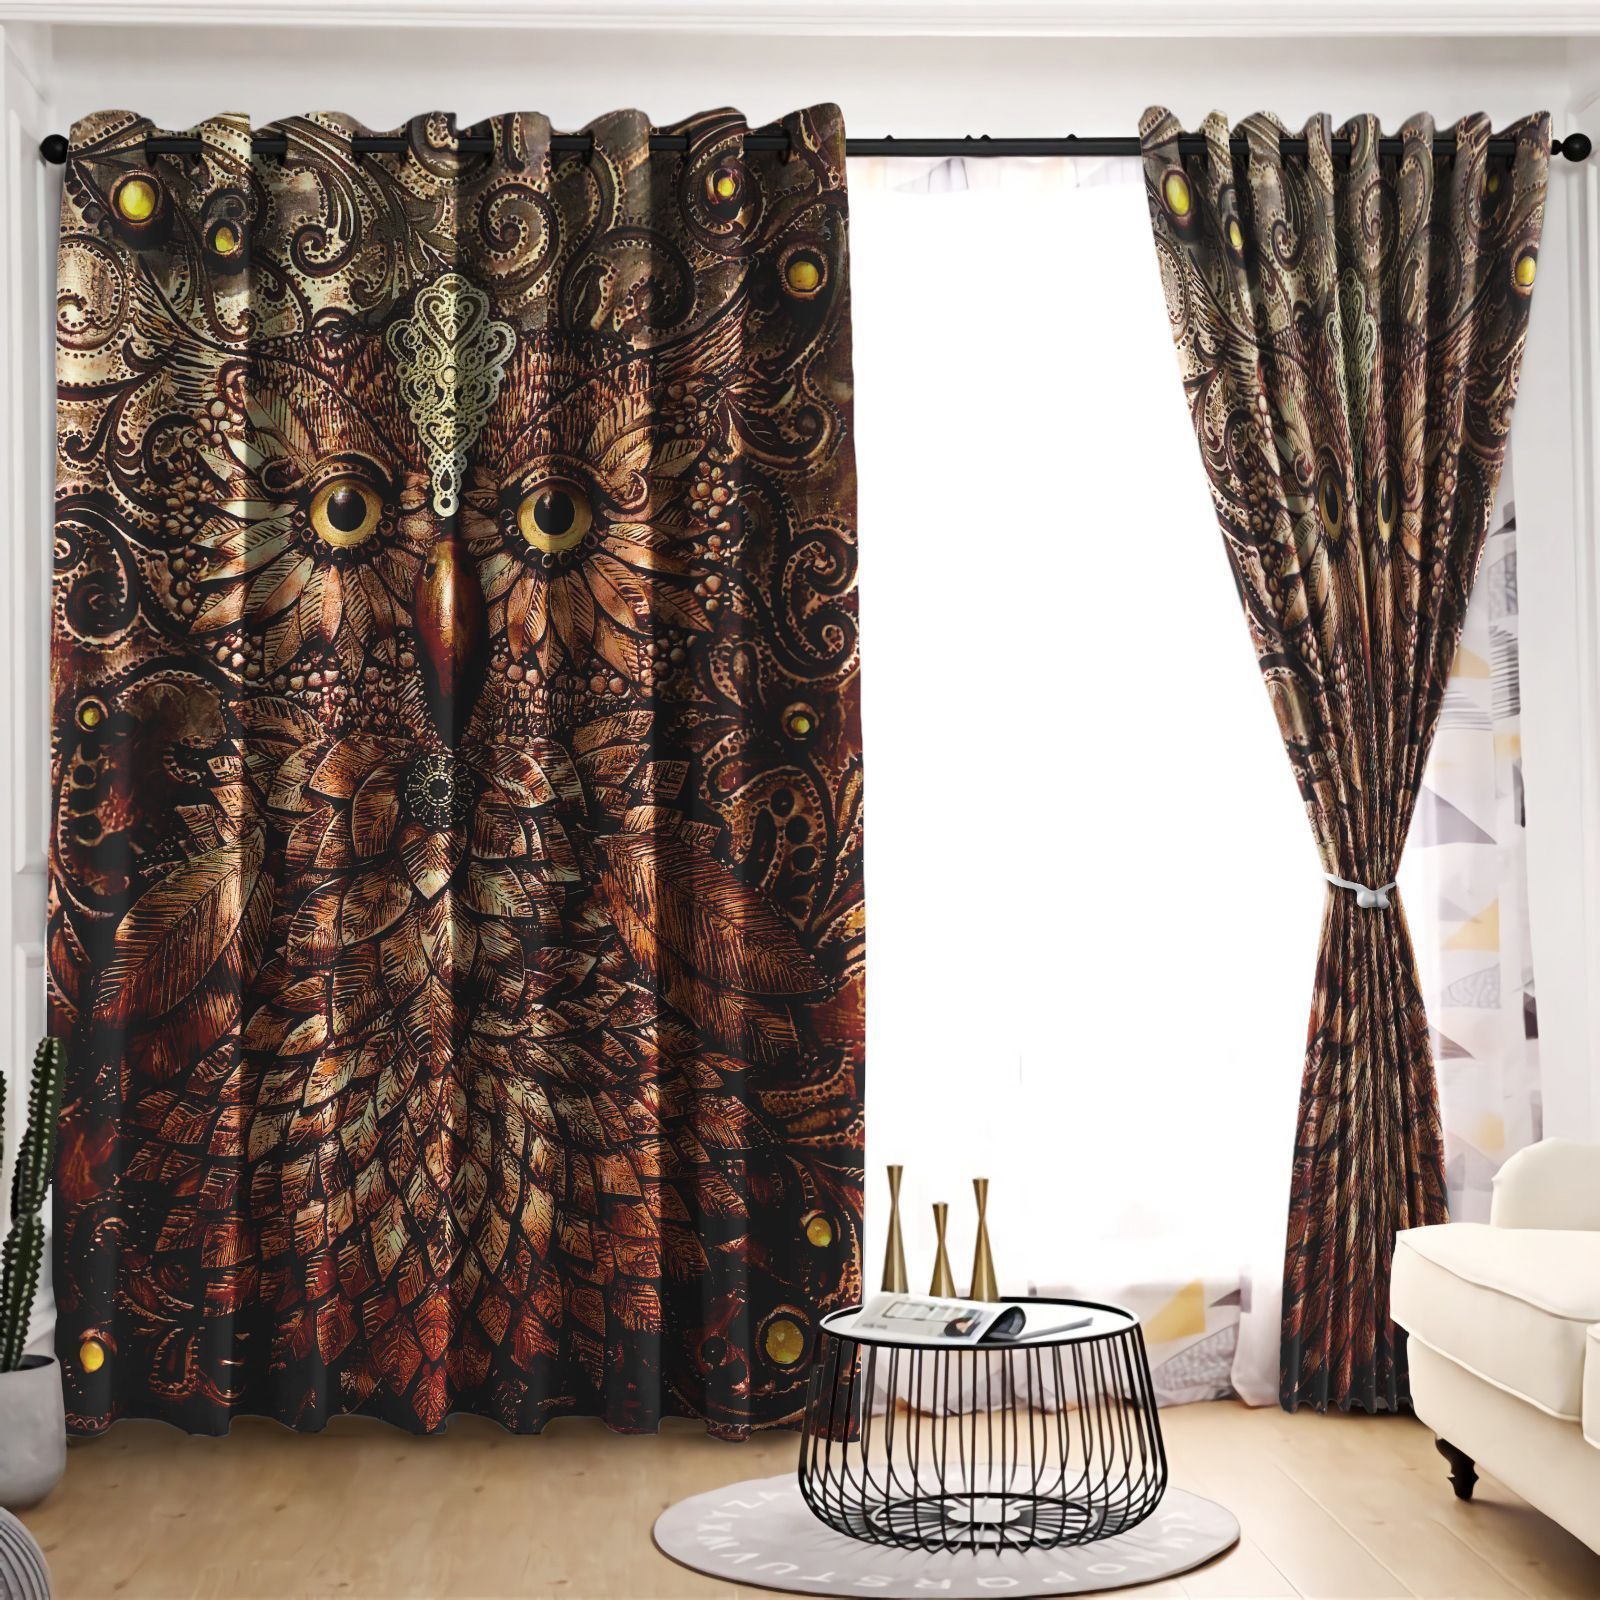 Paisley Design Brown Background Owl Printed Window Curtain Home Decor